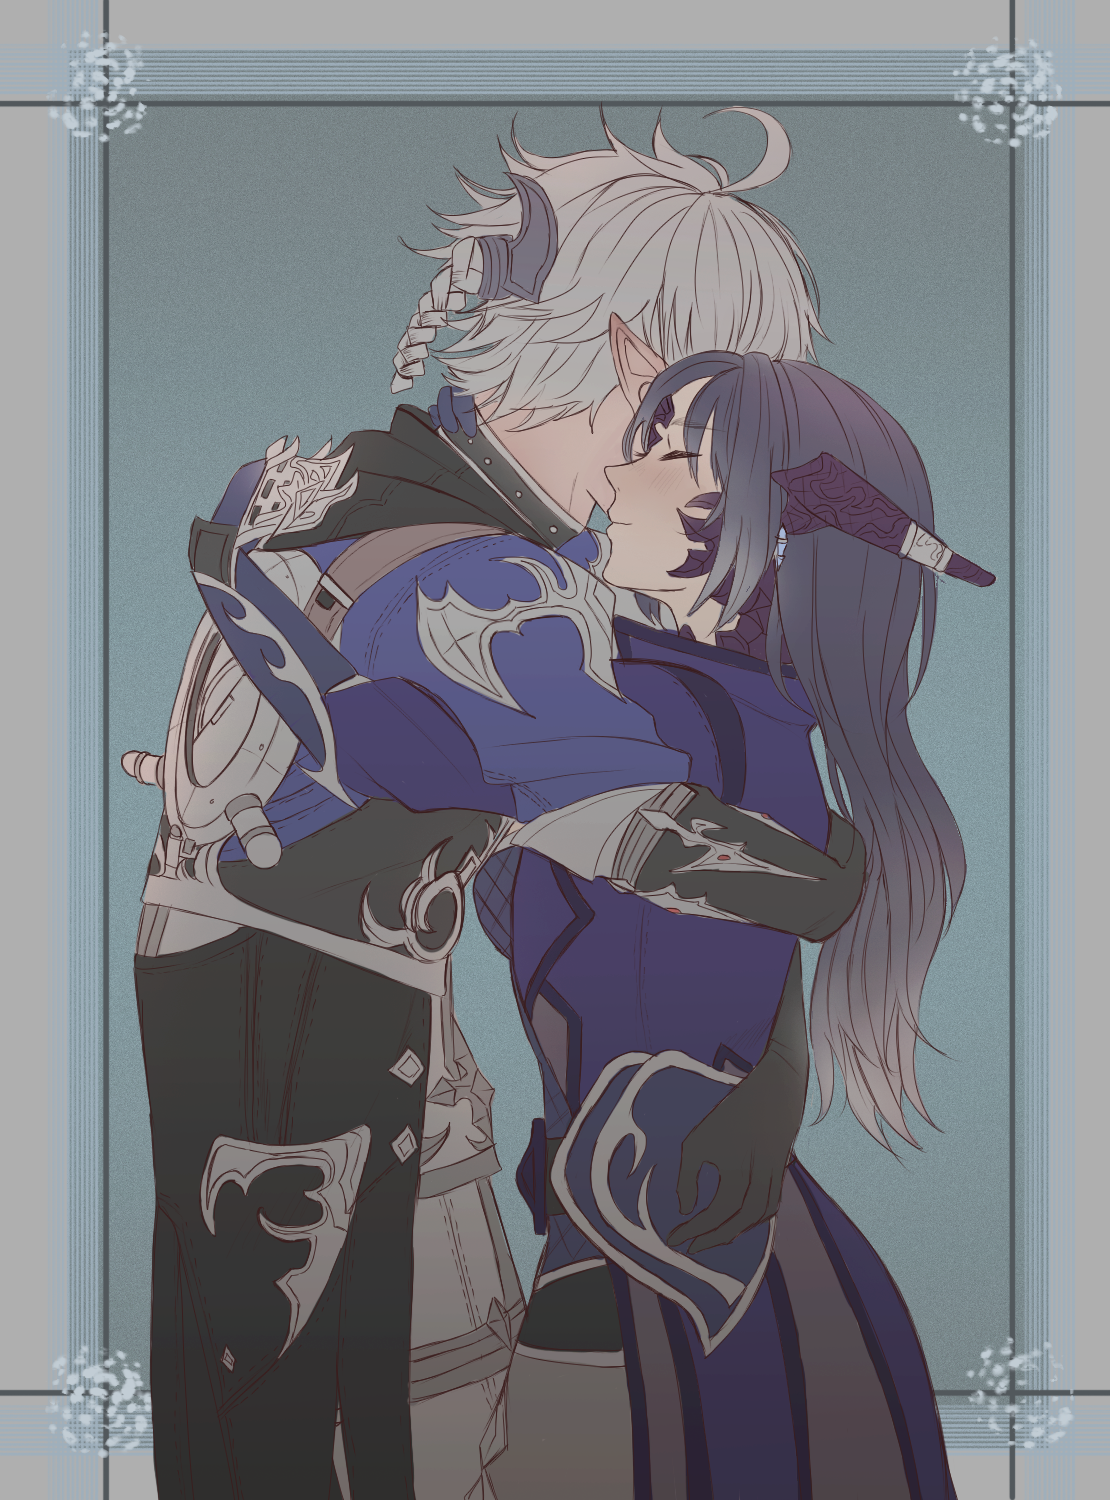 Alisaie X Wol - wol x npc | Tumblr : Anyone catch alisaie crossing her arms and glaring at the ...